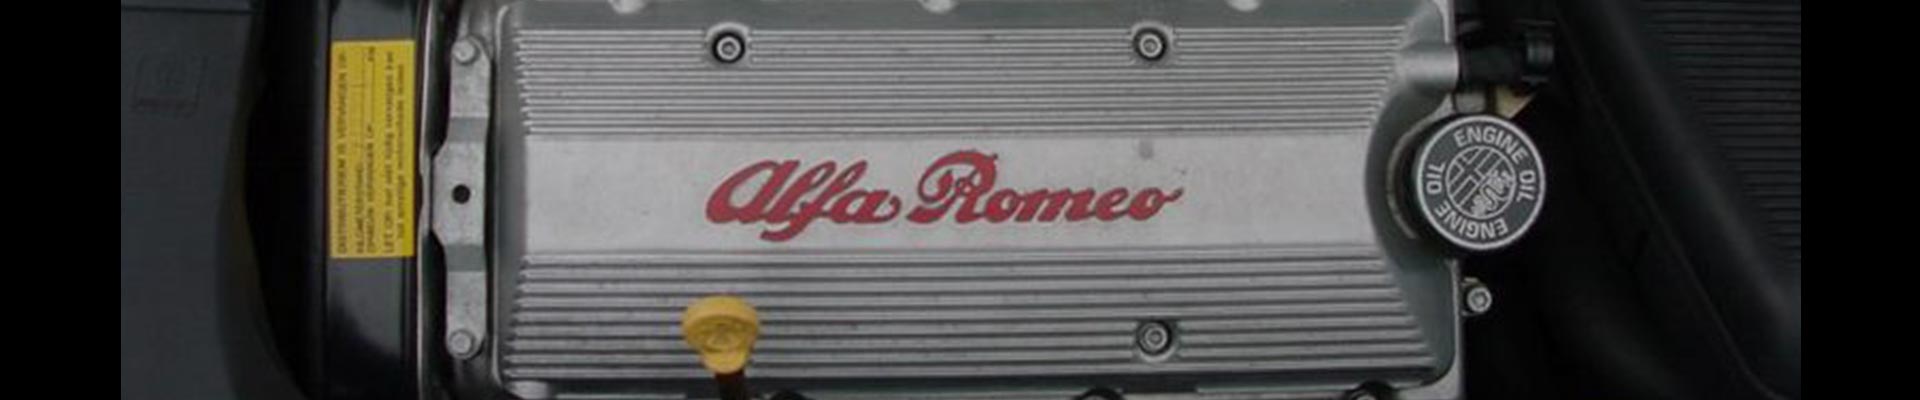 Shop Replacement Alfa Romeo GTV-6 Parts with Discounted Price on the Net